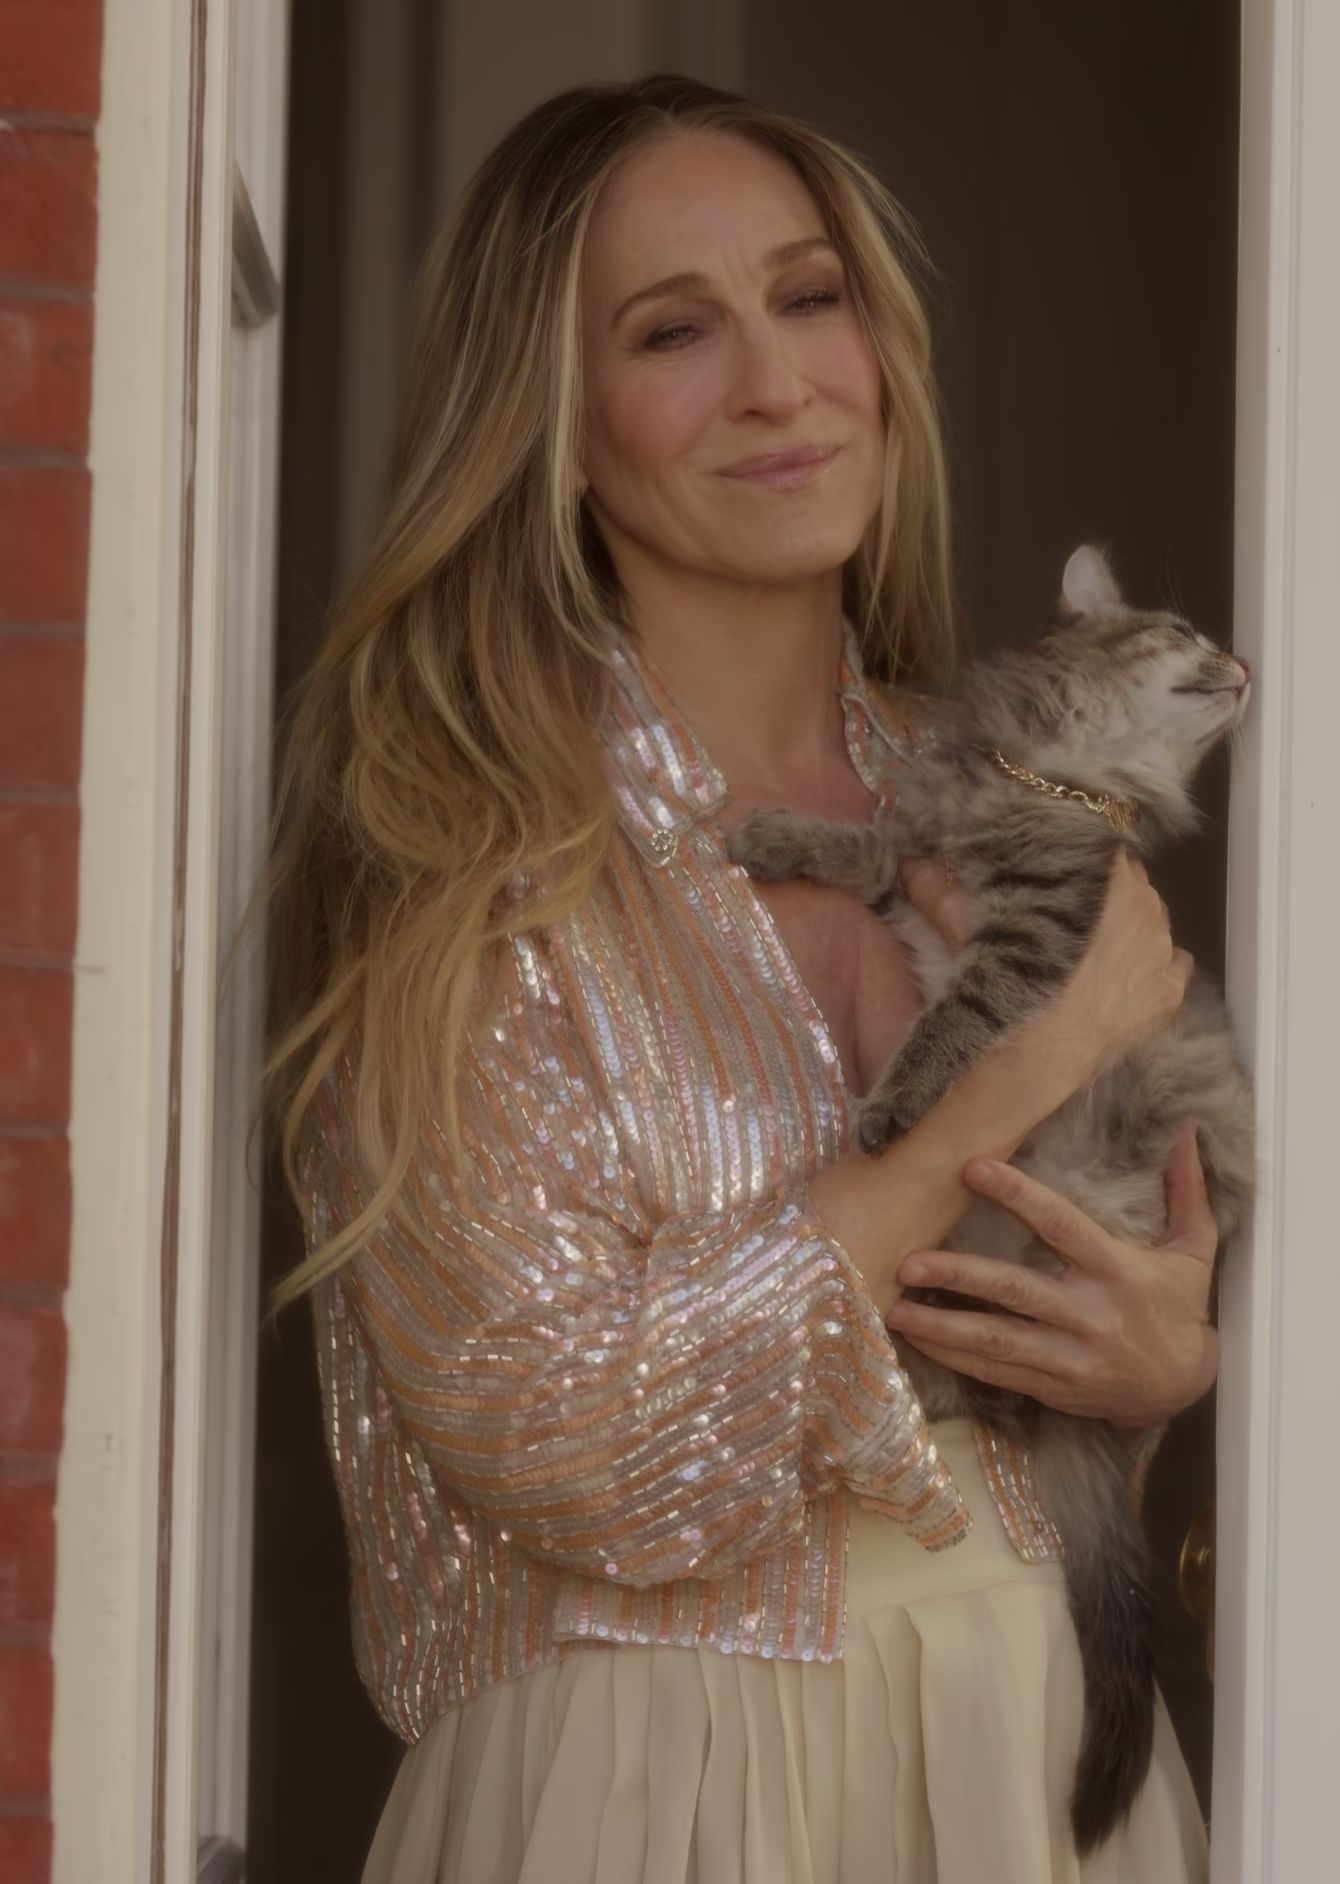 Worn on And Just Like That... TV Show - Rose Gold Sequin Embellished Shirt of Sarah Jessica Parker as Carrie Bradshaw